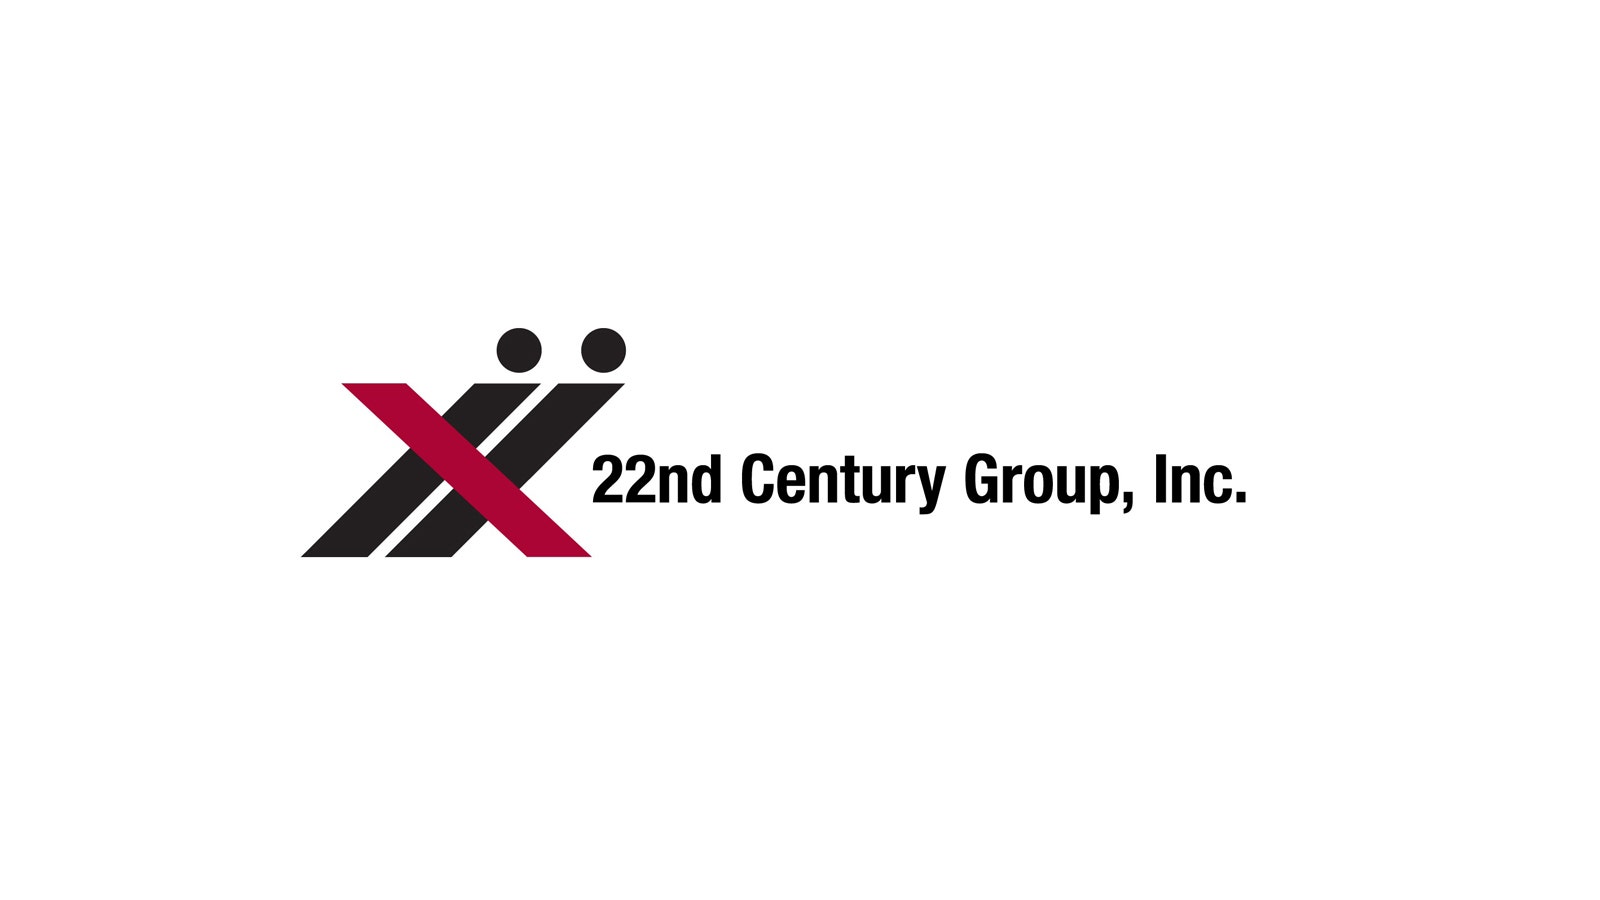 22nd Century Group Reports Revenue Gains In Q3, Seeks To Monetize Its Hemp & Cannabis Plant Lines